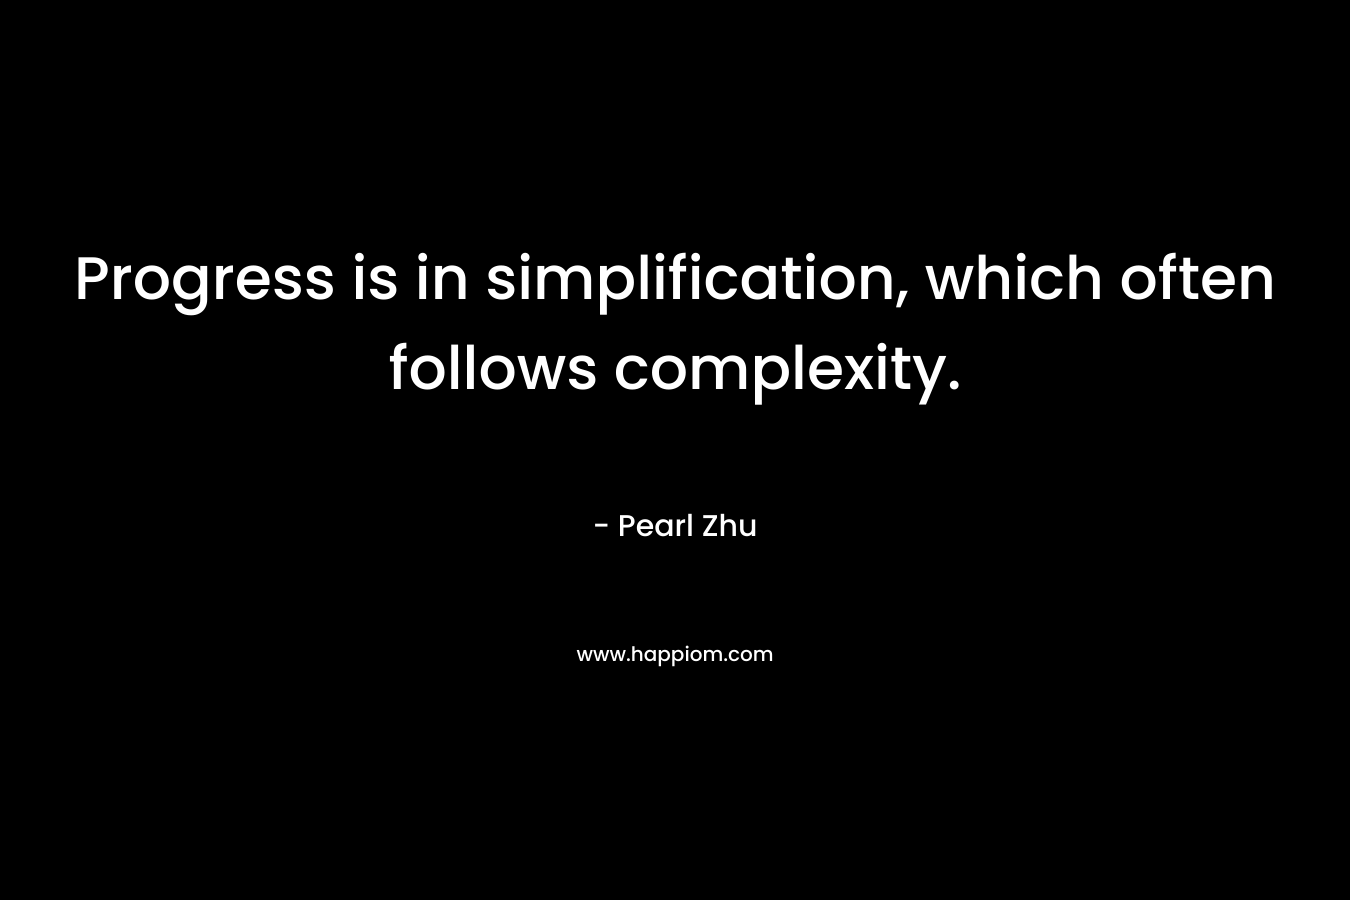 Progress is in simplification, which often follows complexity.